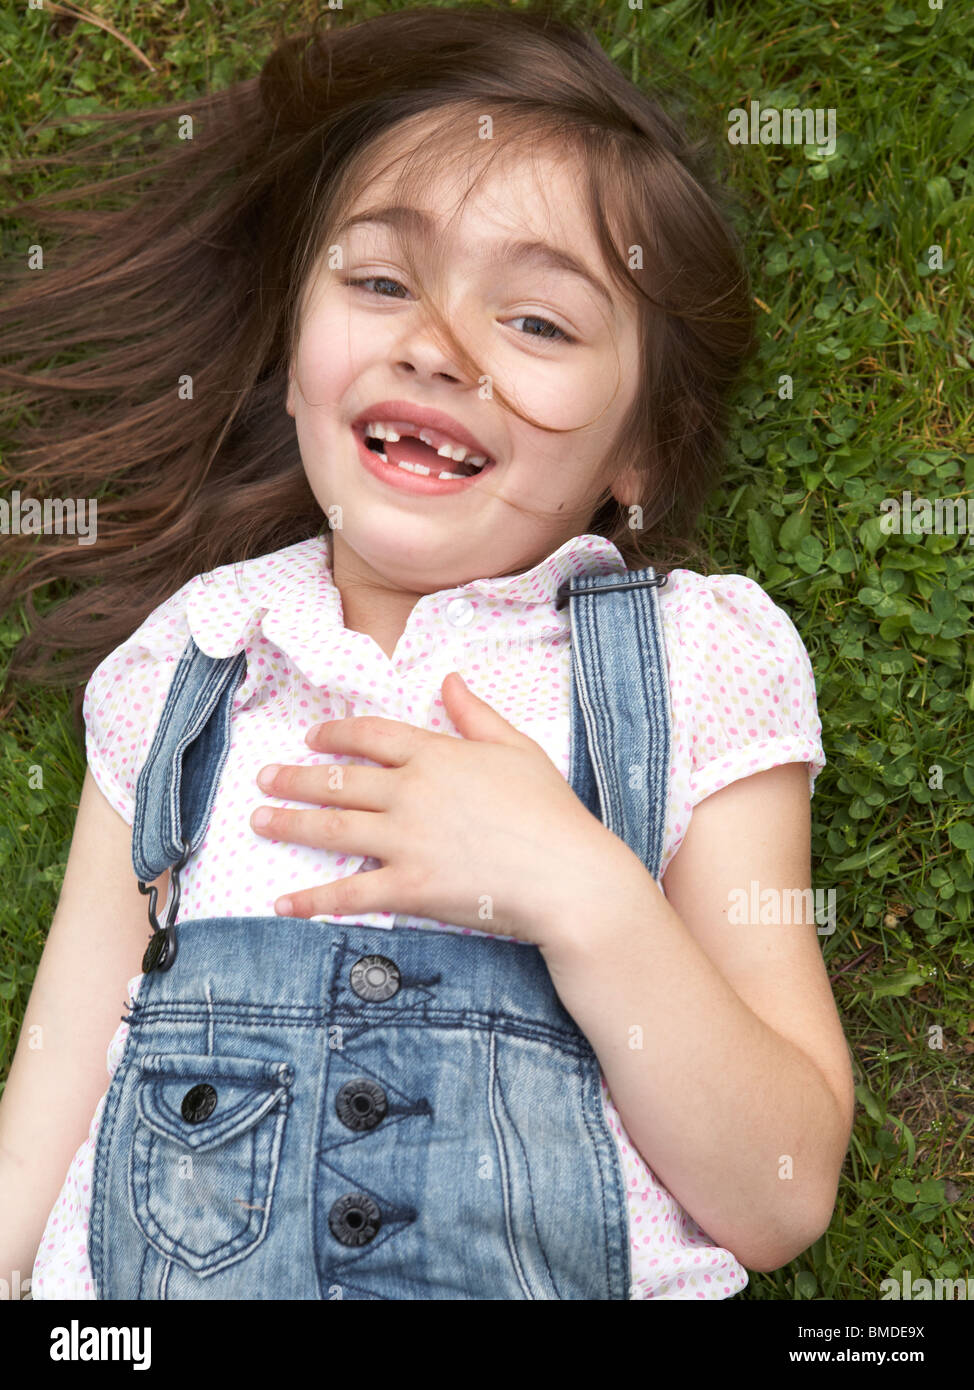 Young girl laying in grass Stock Photo